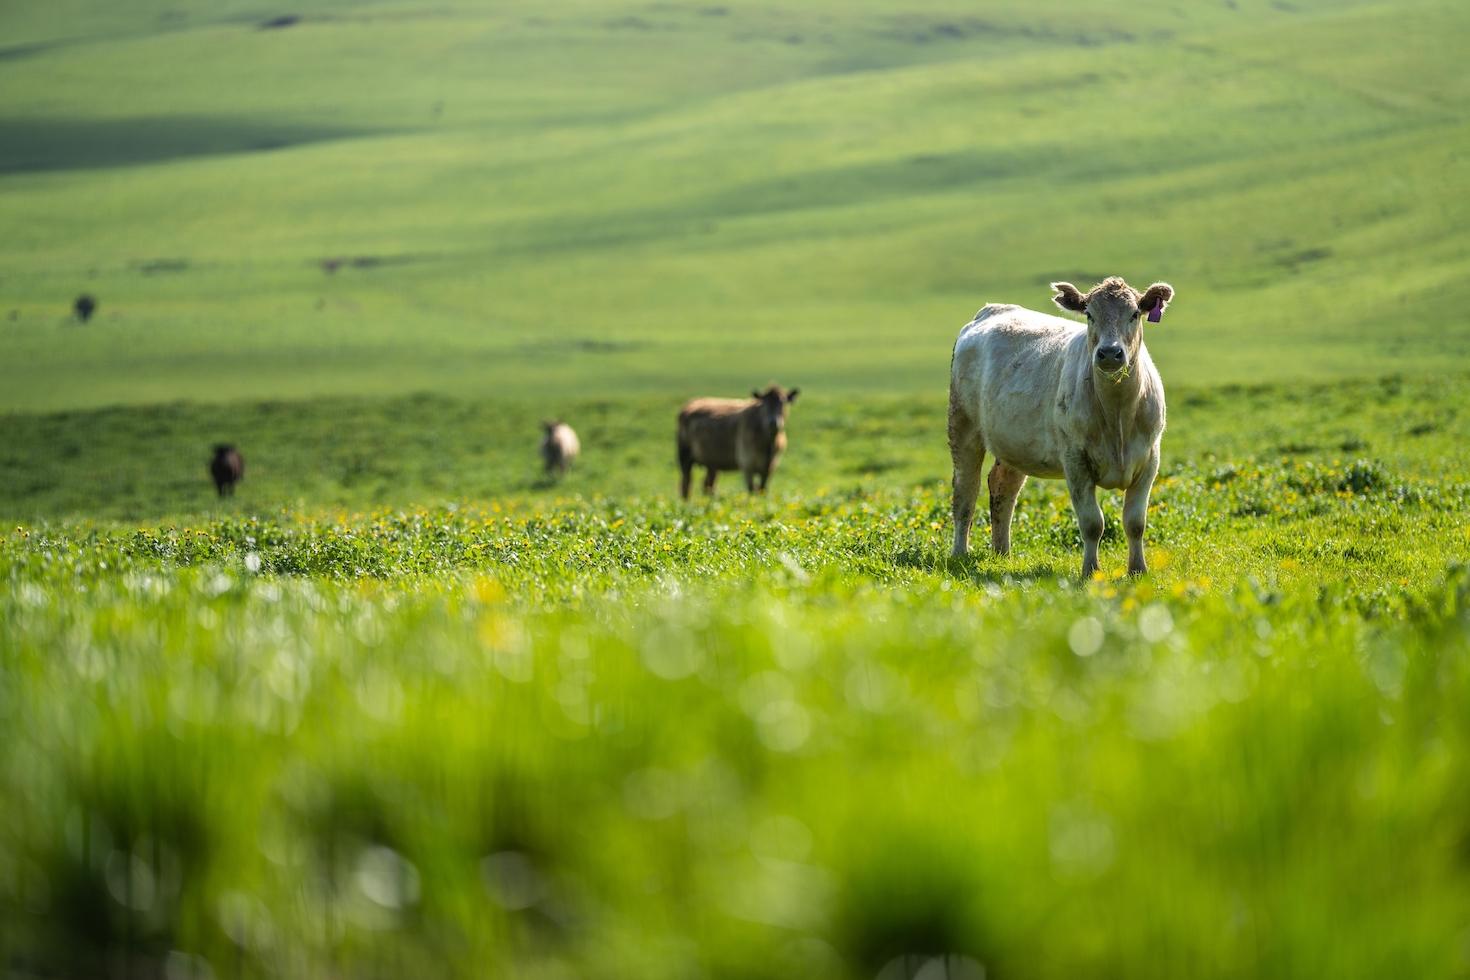 Cattle grazing on a field in the spring